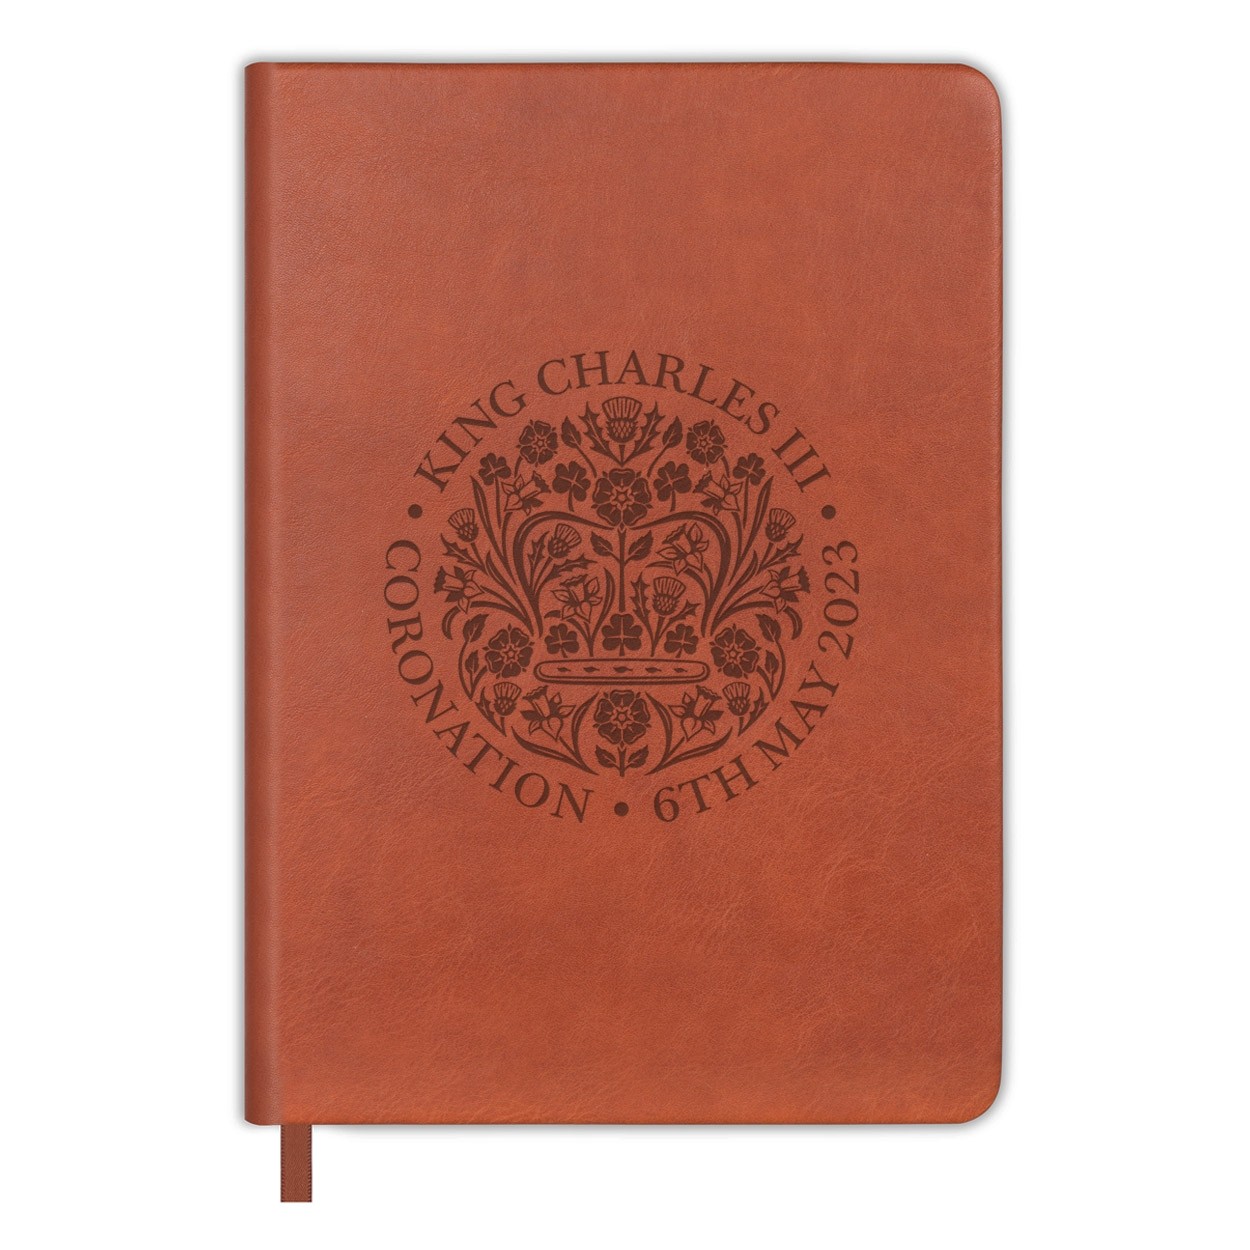 Coronation Emblem King Charles III Notebook Notepad Lined A5 PU Leather Effect Tan Brown King's Coronation Commemorative Souvenir Gift 6th May 2023